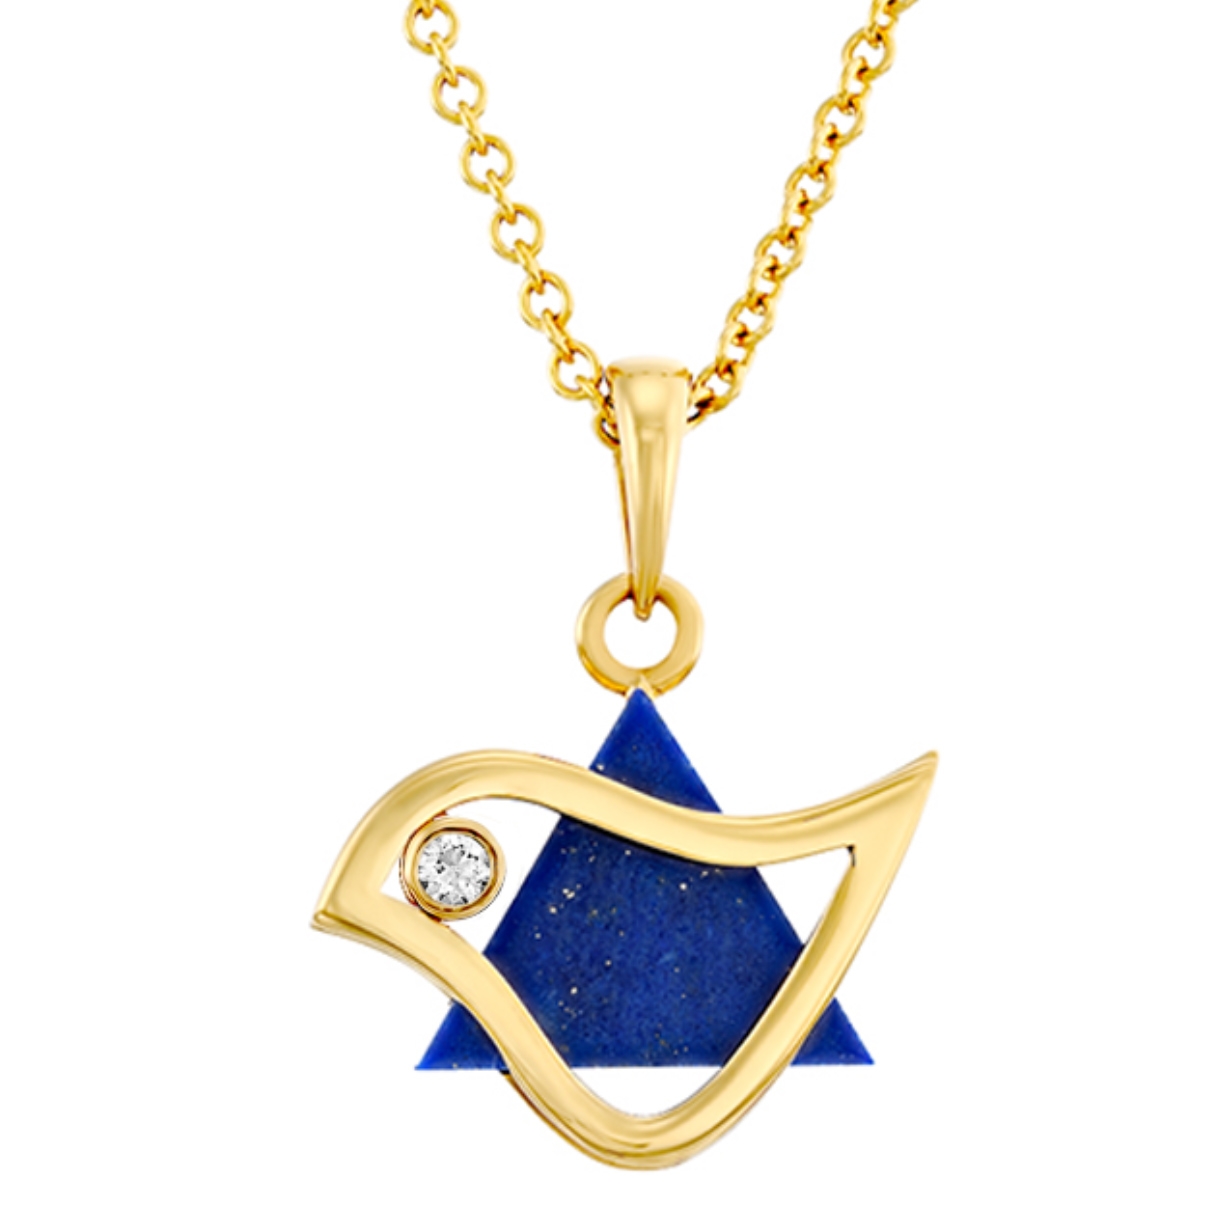 18K Gold and Lapis Lazuli Dove of Peace & Star of David Diamond Pendant Necklace (Choice of Color) - 1